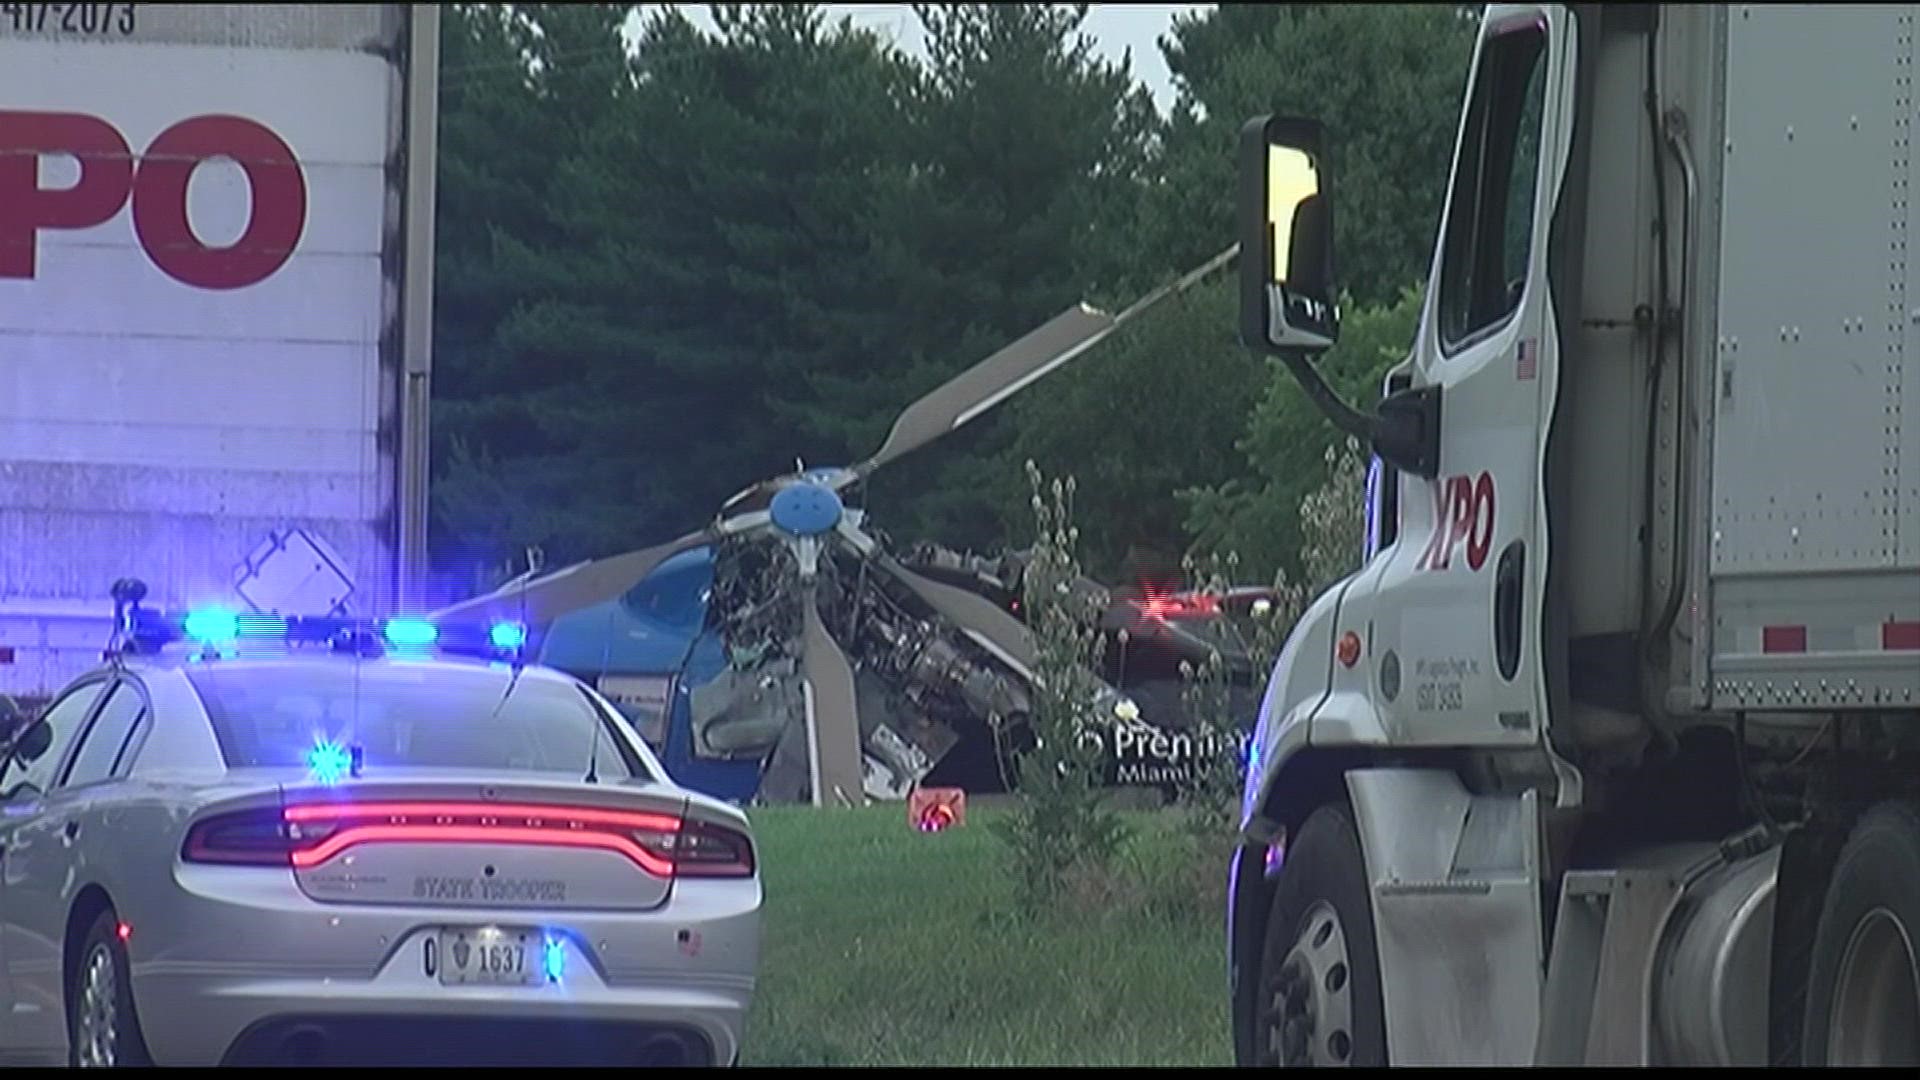 Authorities said a 69-year-old woman from Richmond, Indiana, was pronounced dead at the scene of the vehicle accident that the helicopter was responding to.